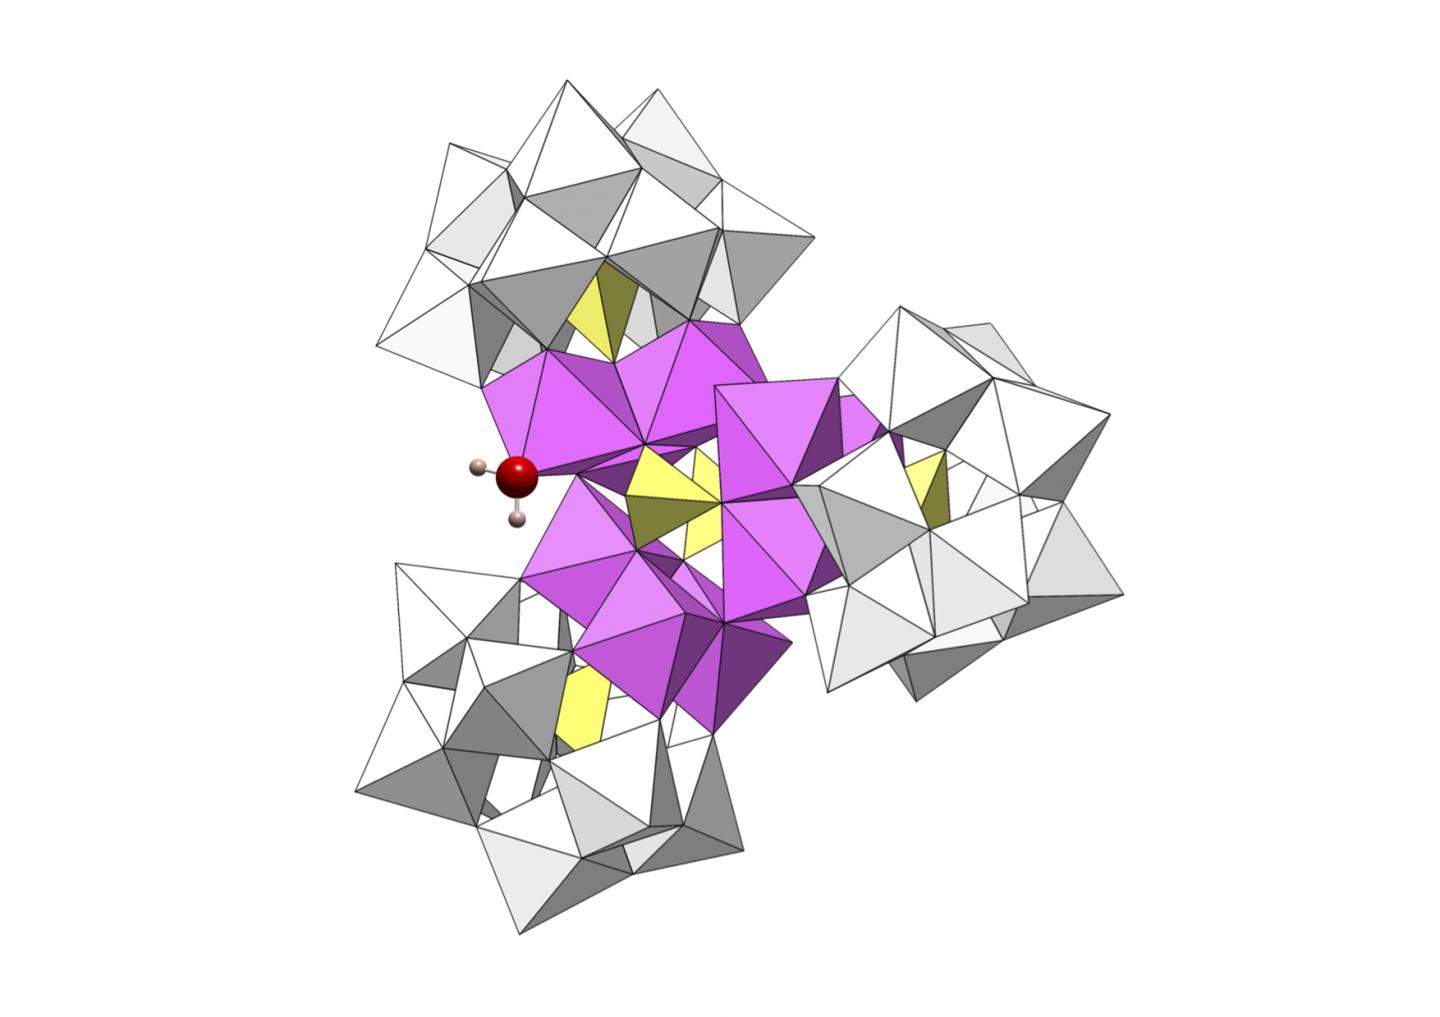 The New Polyoxometalate Featuring Cobalt and Tungsten